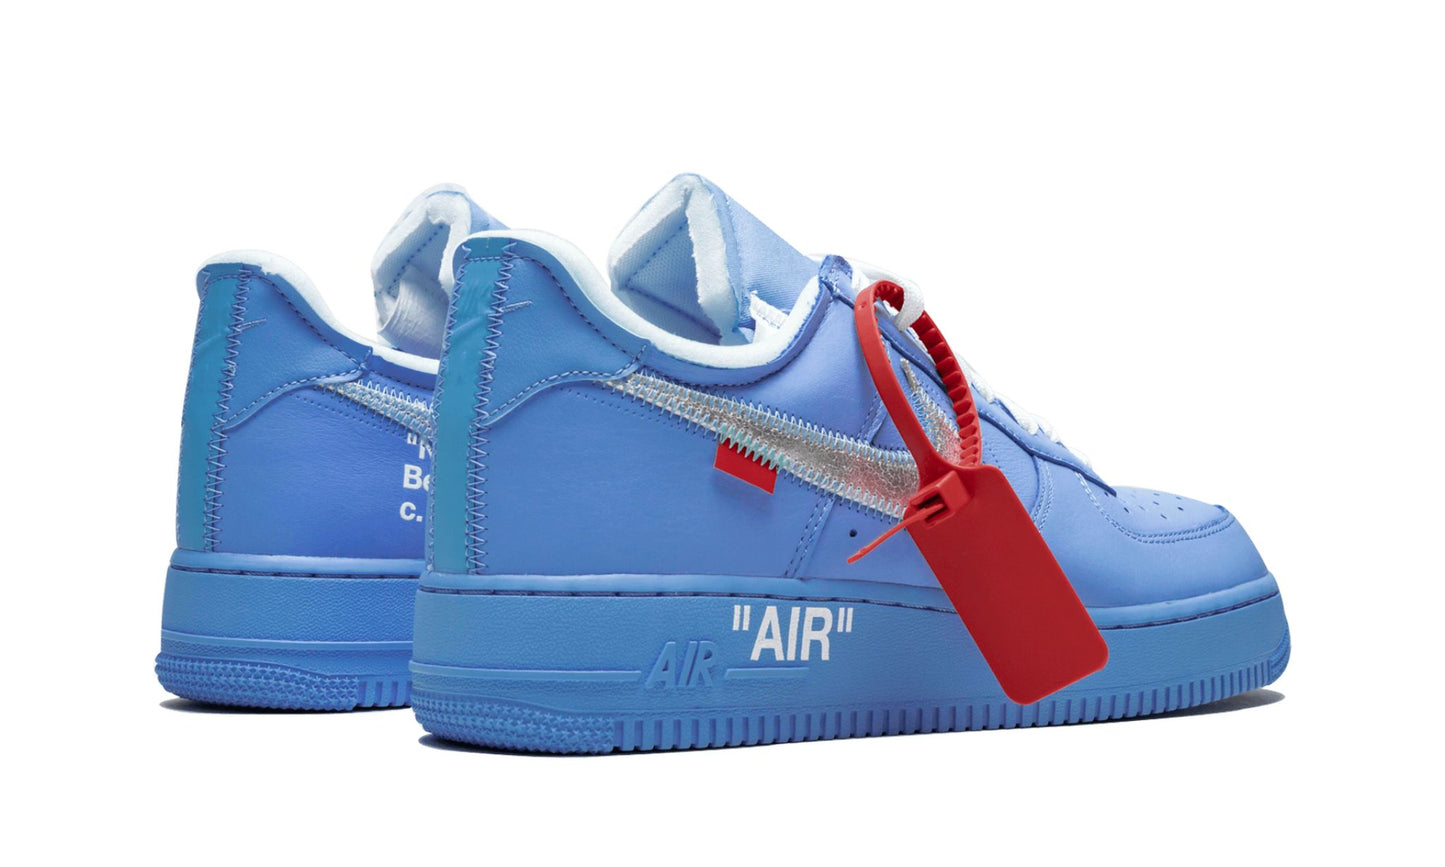 Nike Air Force 1 Low Off-White University Blue MCA